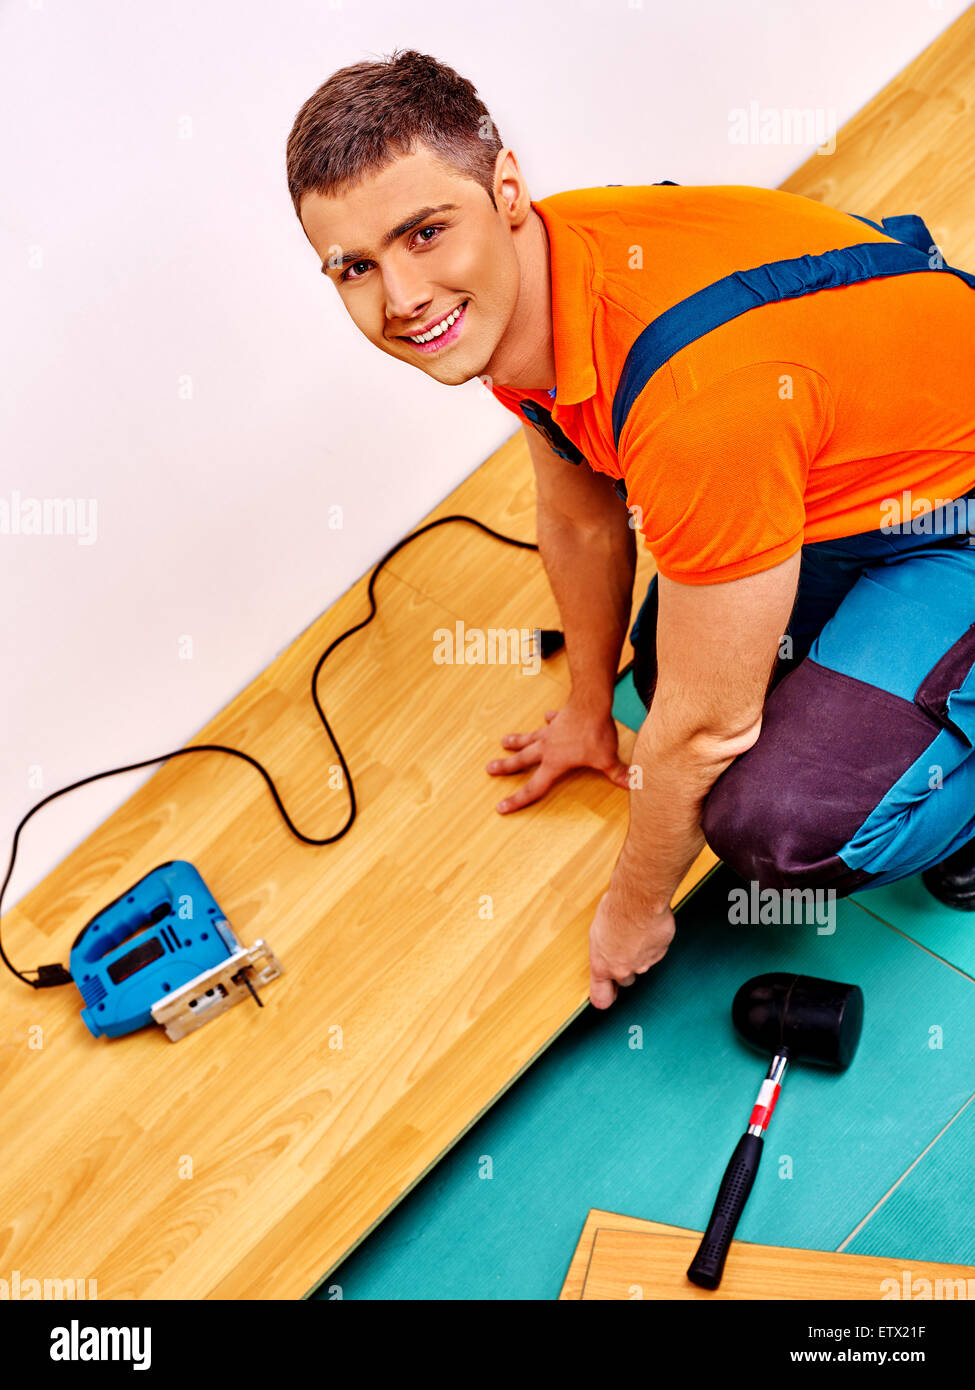 Men laying parquet at home Stock Photo